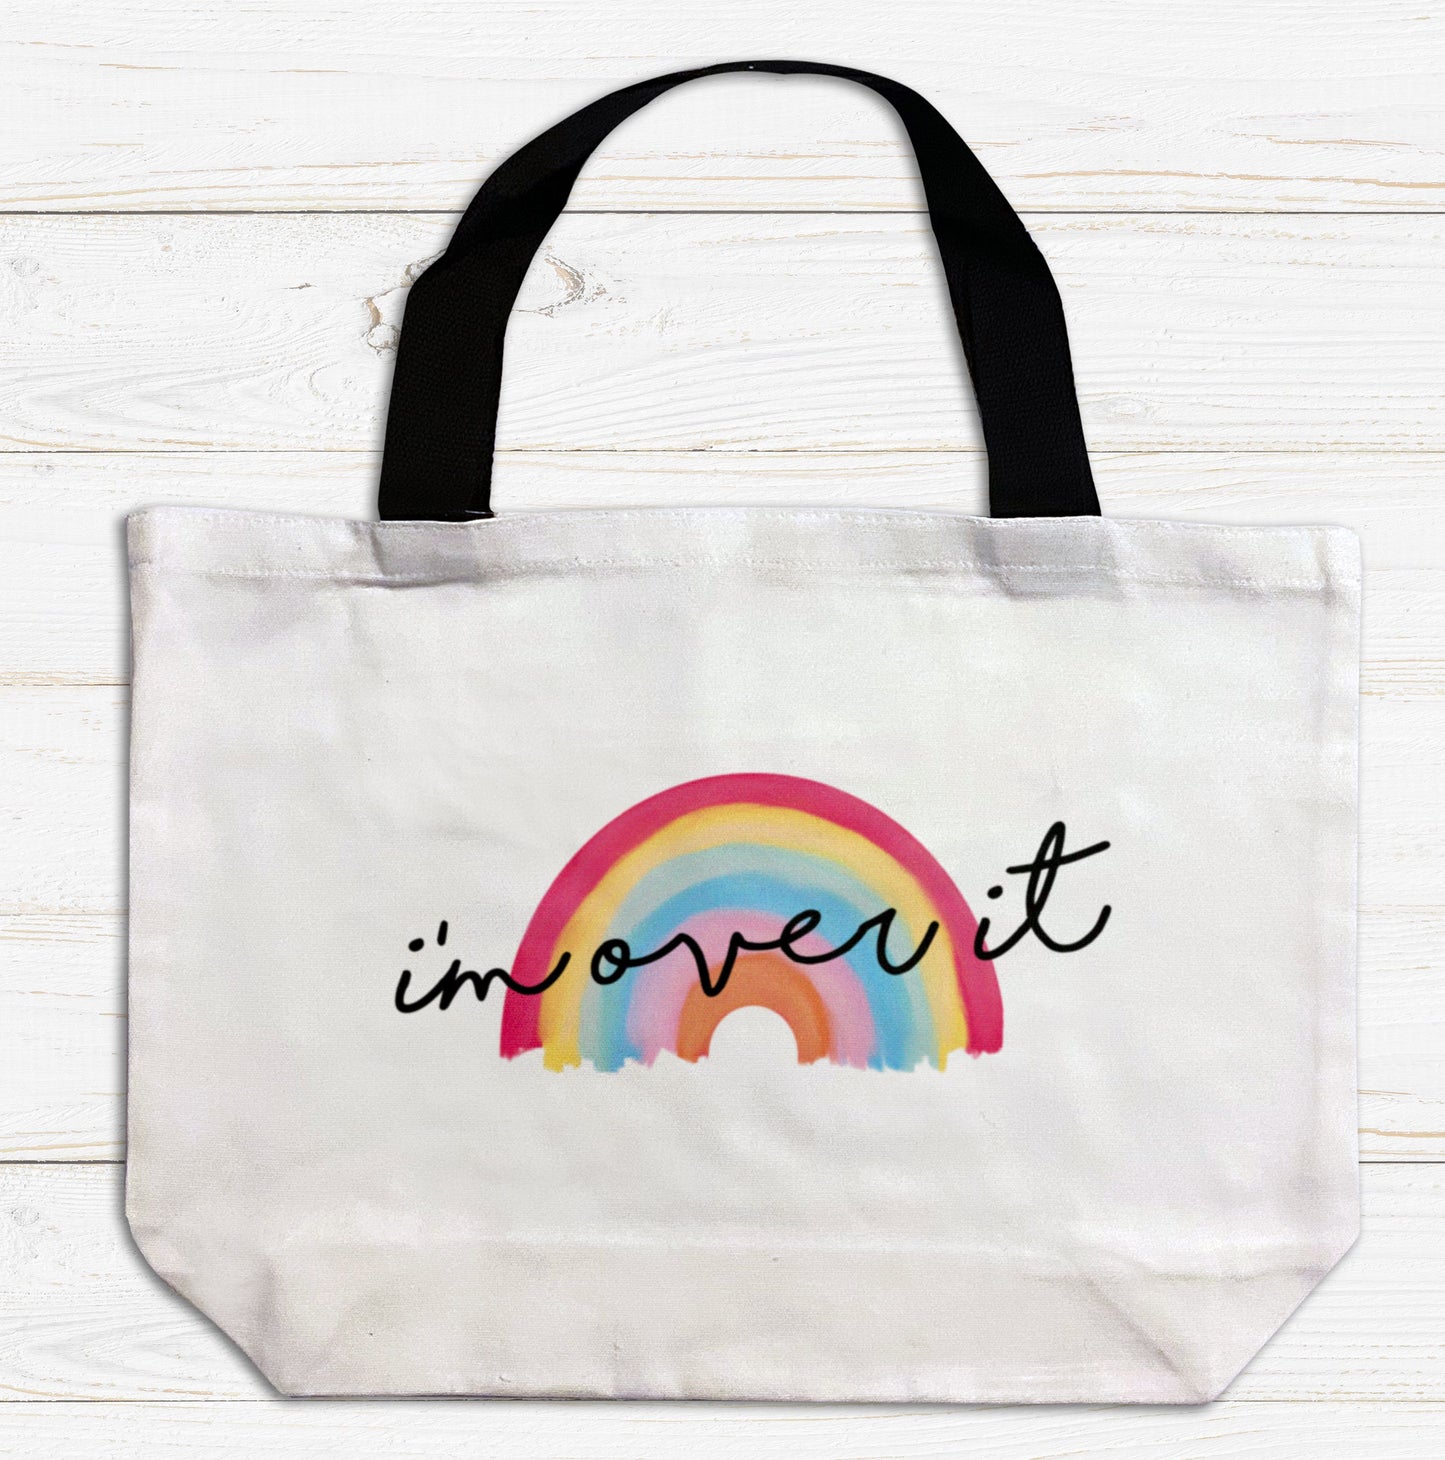 I'm over it Rainbow Large Tote Bag. Large Shopping bag. Birthday Gift. Unique Gift Idea. Cute Tote Bag. Gifts for her. Rainbow Gift.